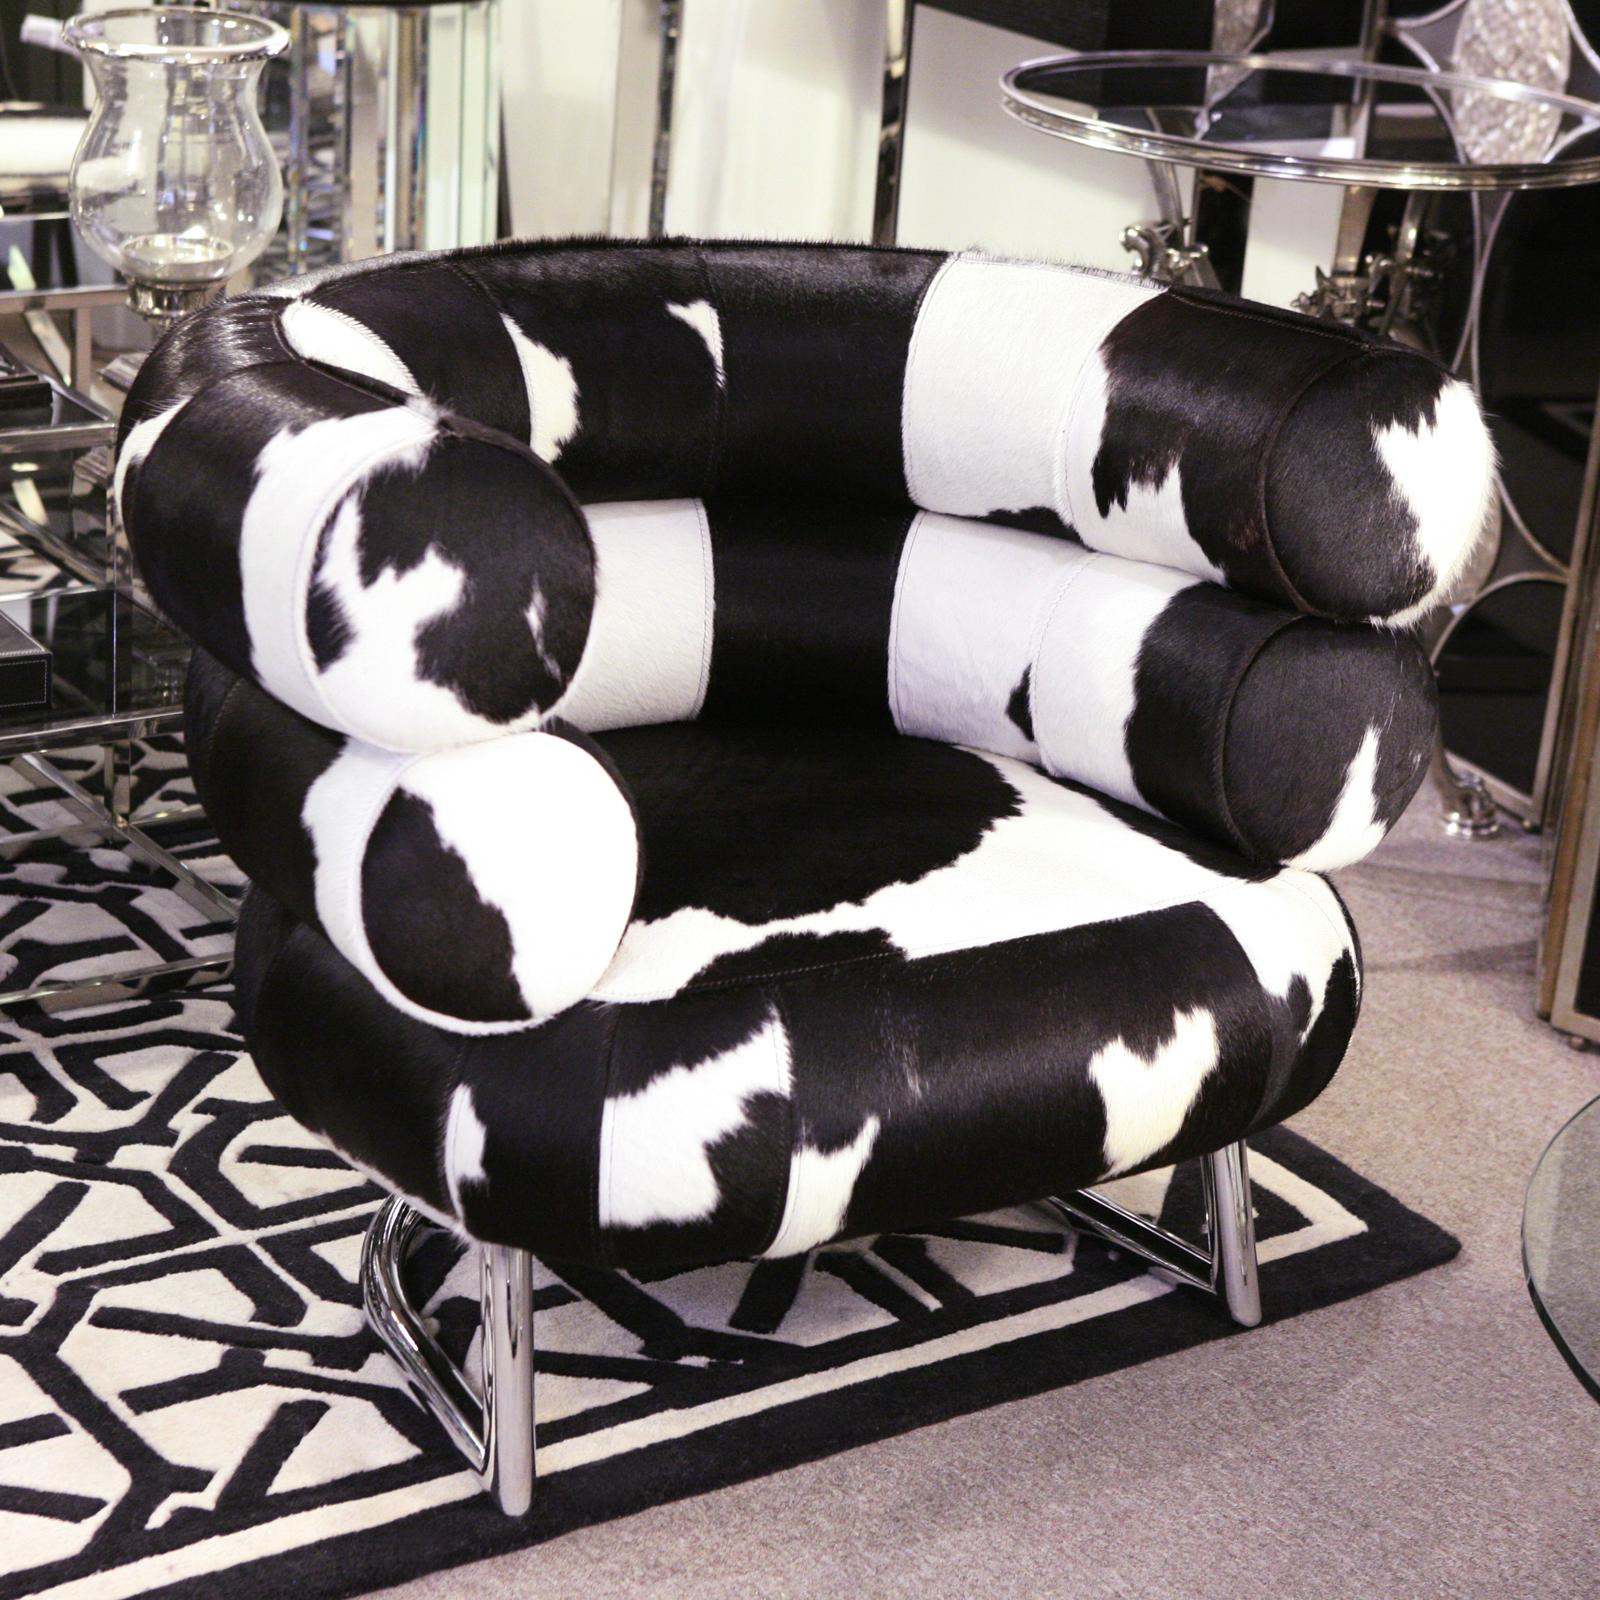 Pony Bibendum 2 armchair black and white,
covered with treated natural cowhide,
on polished stainless steel base.
Exceptional piece.